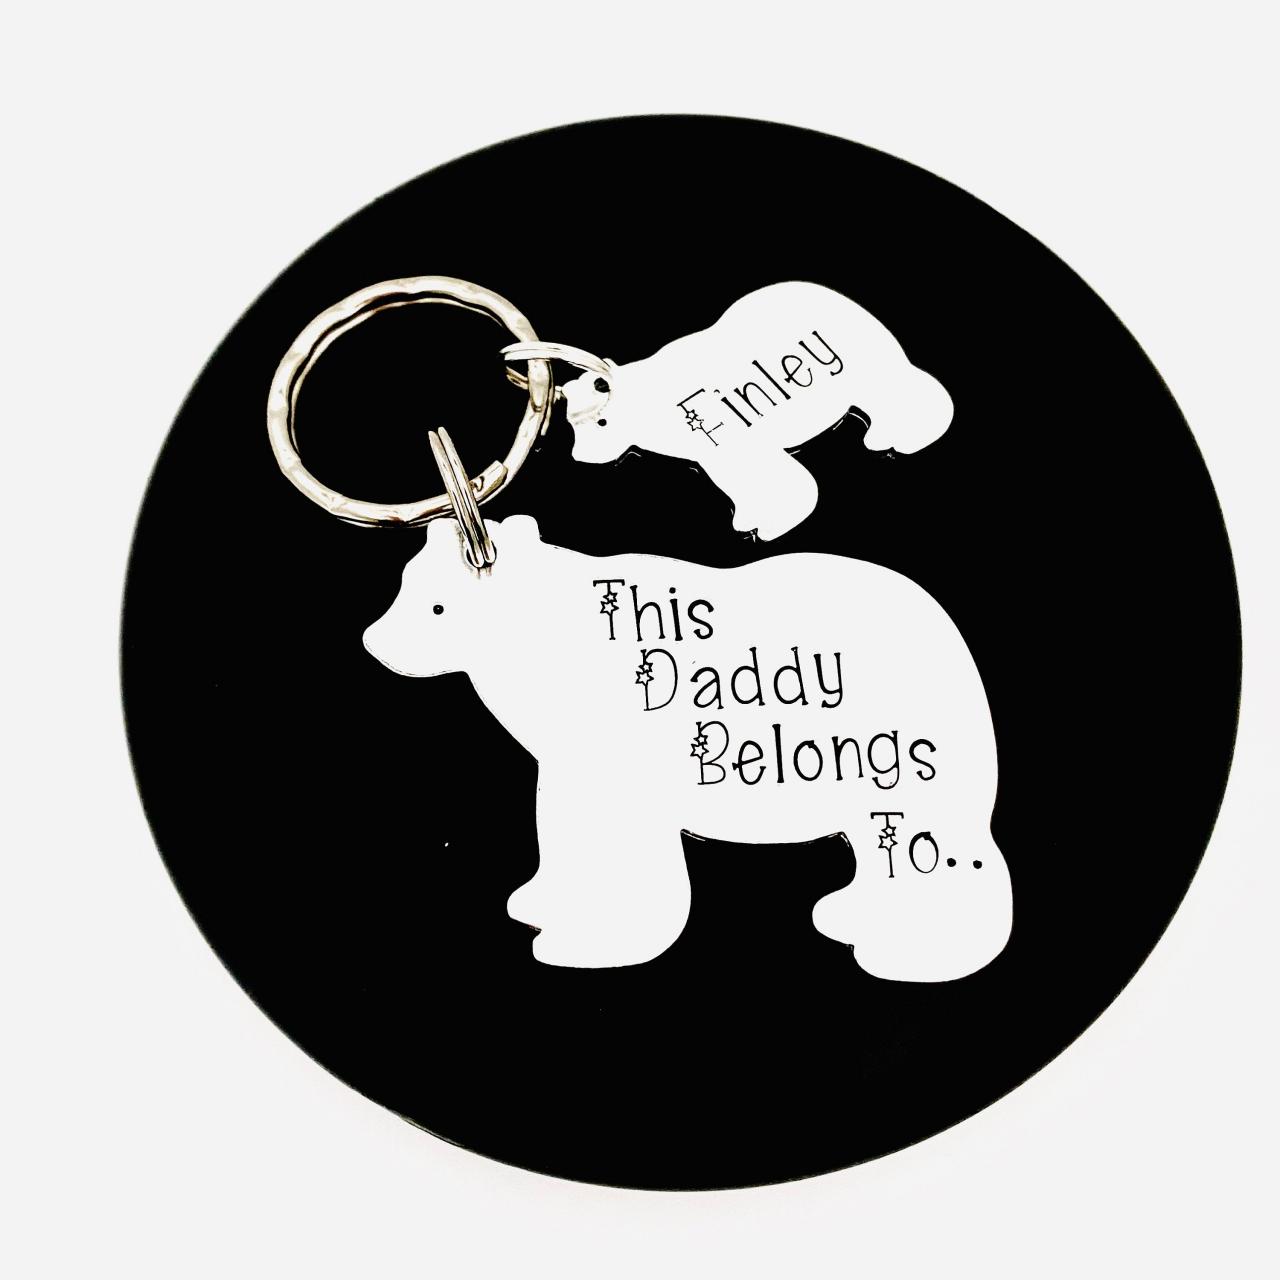 This Daddy Belongs To Keyring, Hand Stamped Daddy Papa Keychain, Bear Keyring, Grandad Grandpa Keyring, Fathers Day Gift, Gift Off The Kids..